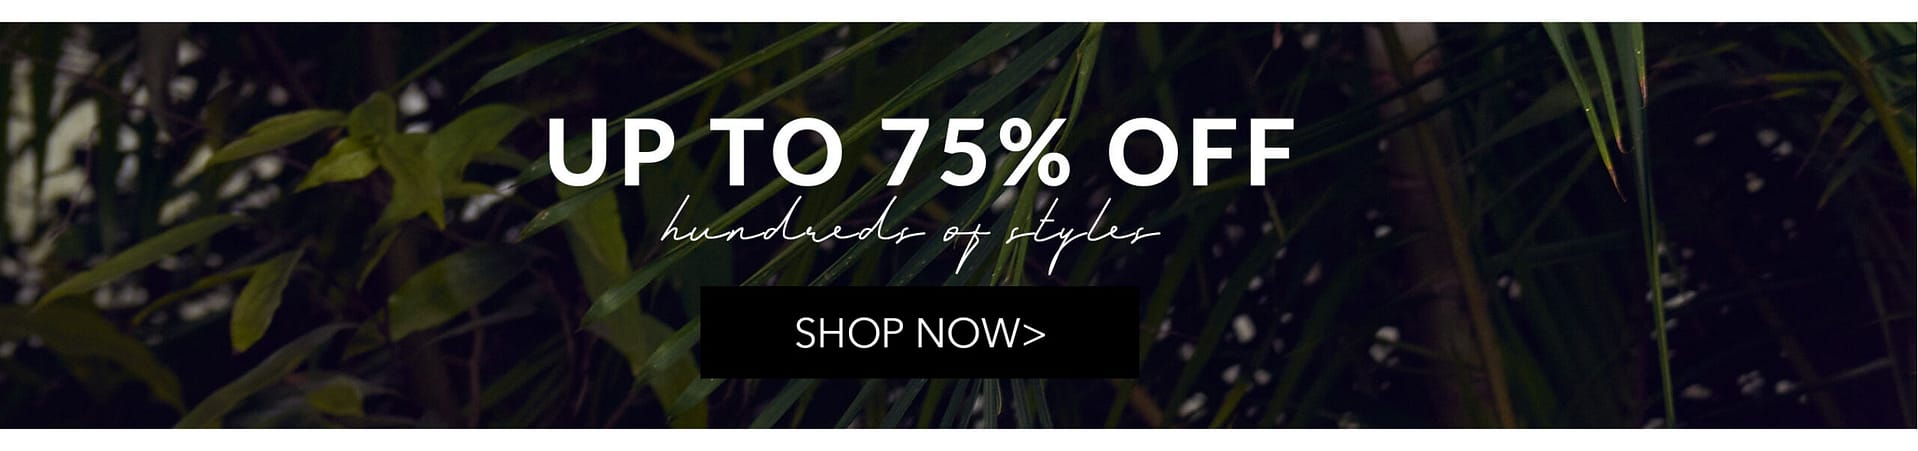 Up to 75% off sale